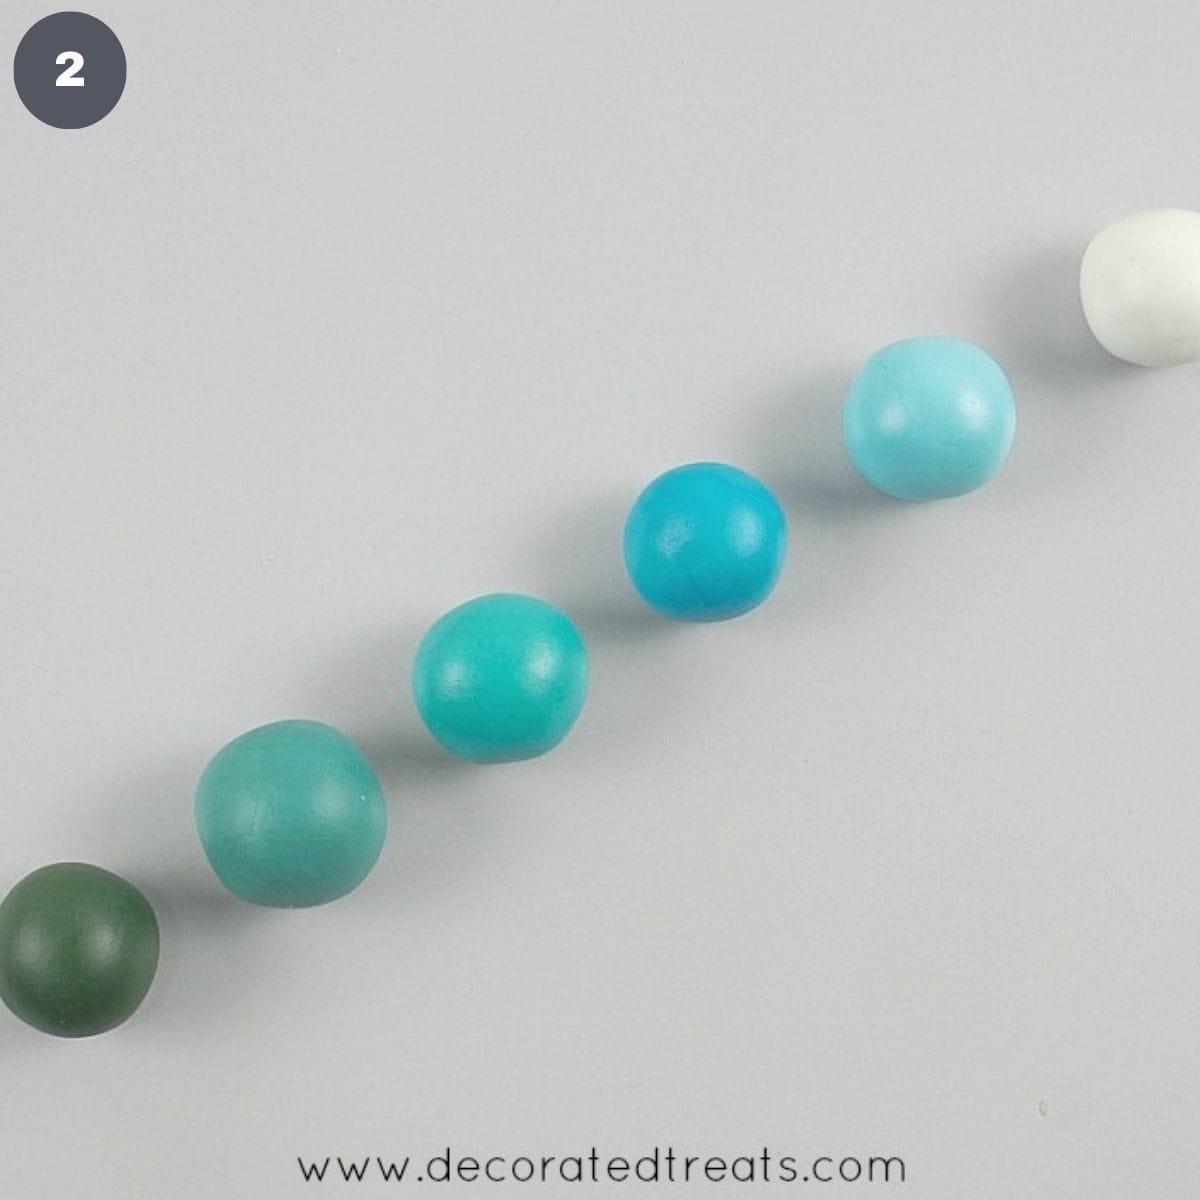 Six balls in deep green, dark turquoise, turquoise, dark blue, light blue and white arranged in a row.